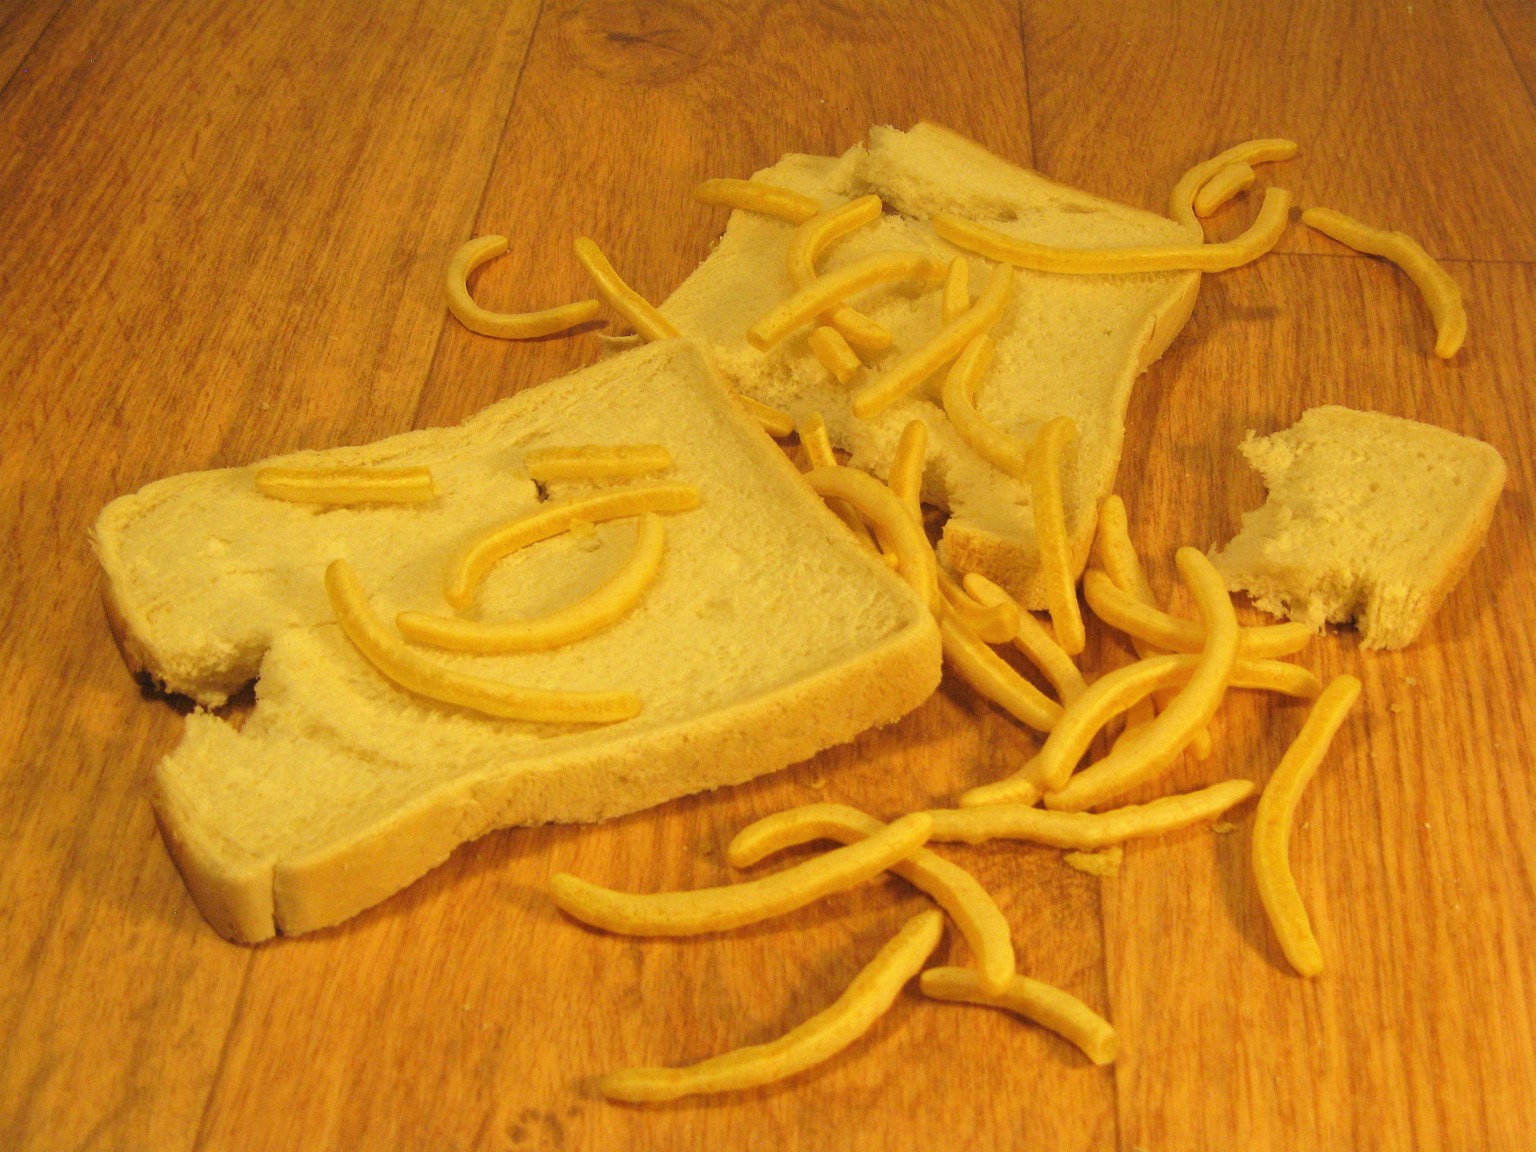 Torn white bread with scattered French Fries snacks